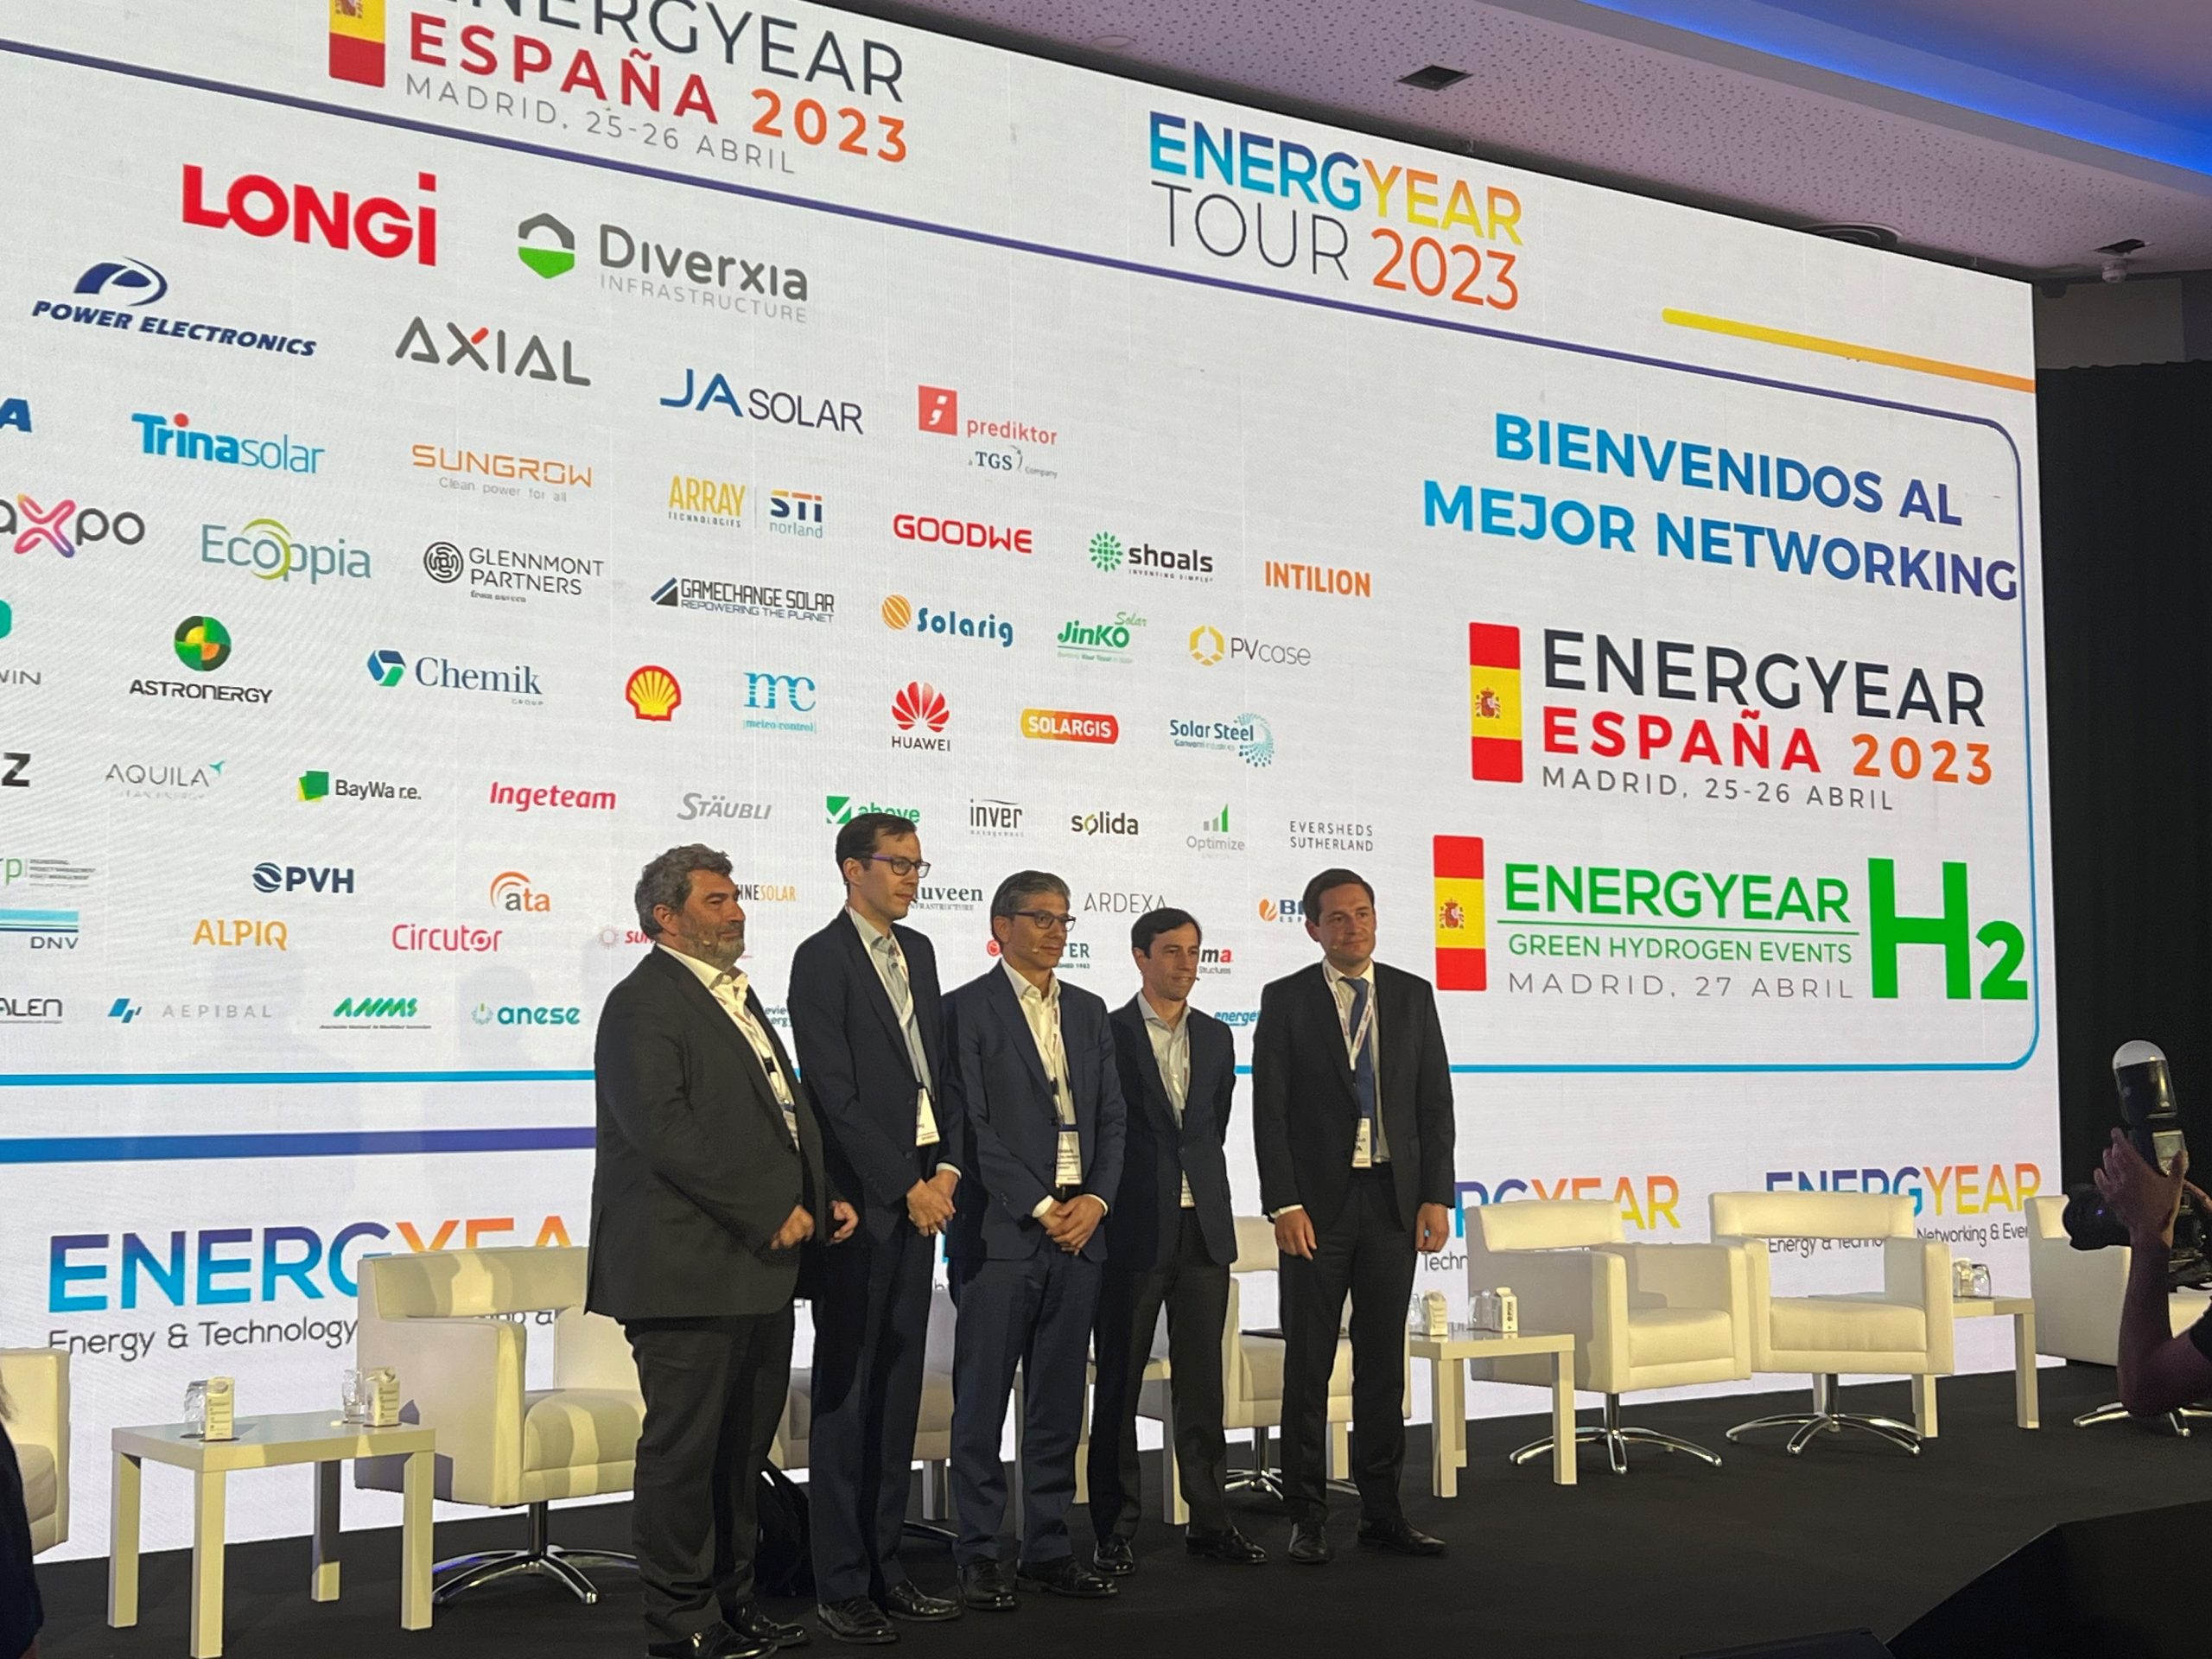 Araoz & Rueda, legal partner of Energyear España 2023, a benchmark event in the field of renewable energies